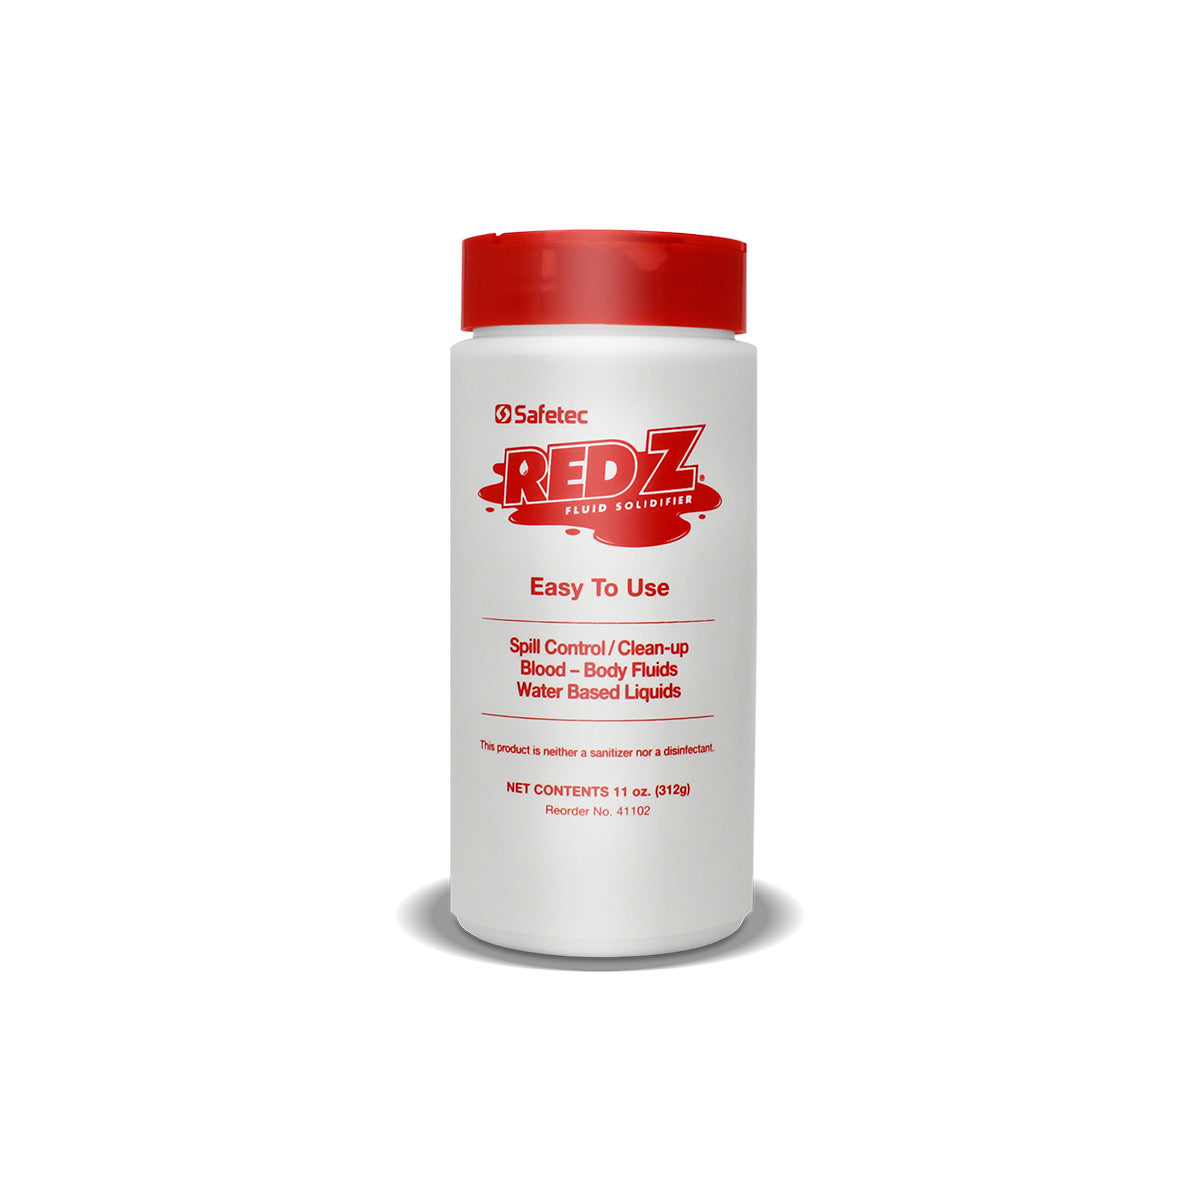 Safetec Red Z Spill Control Solidifier, 11 oz. Shaker top Bottles